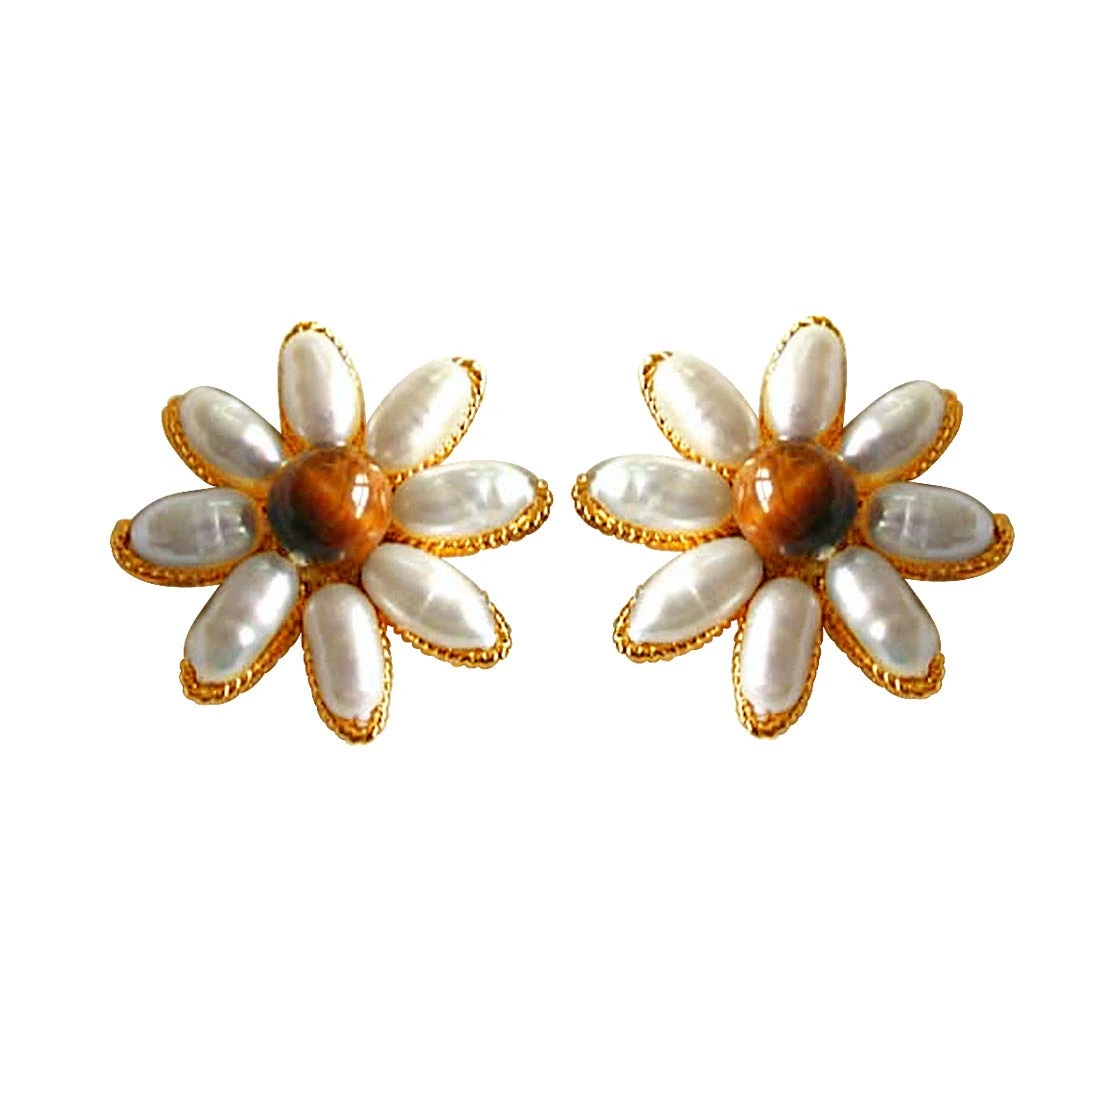 Real Rice Pearl & Tiger Eye Beads Star Shaped Earrings for Women (SE32)